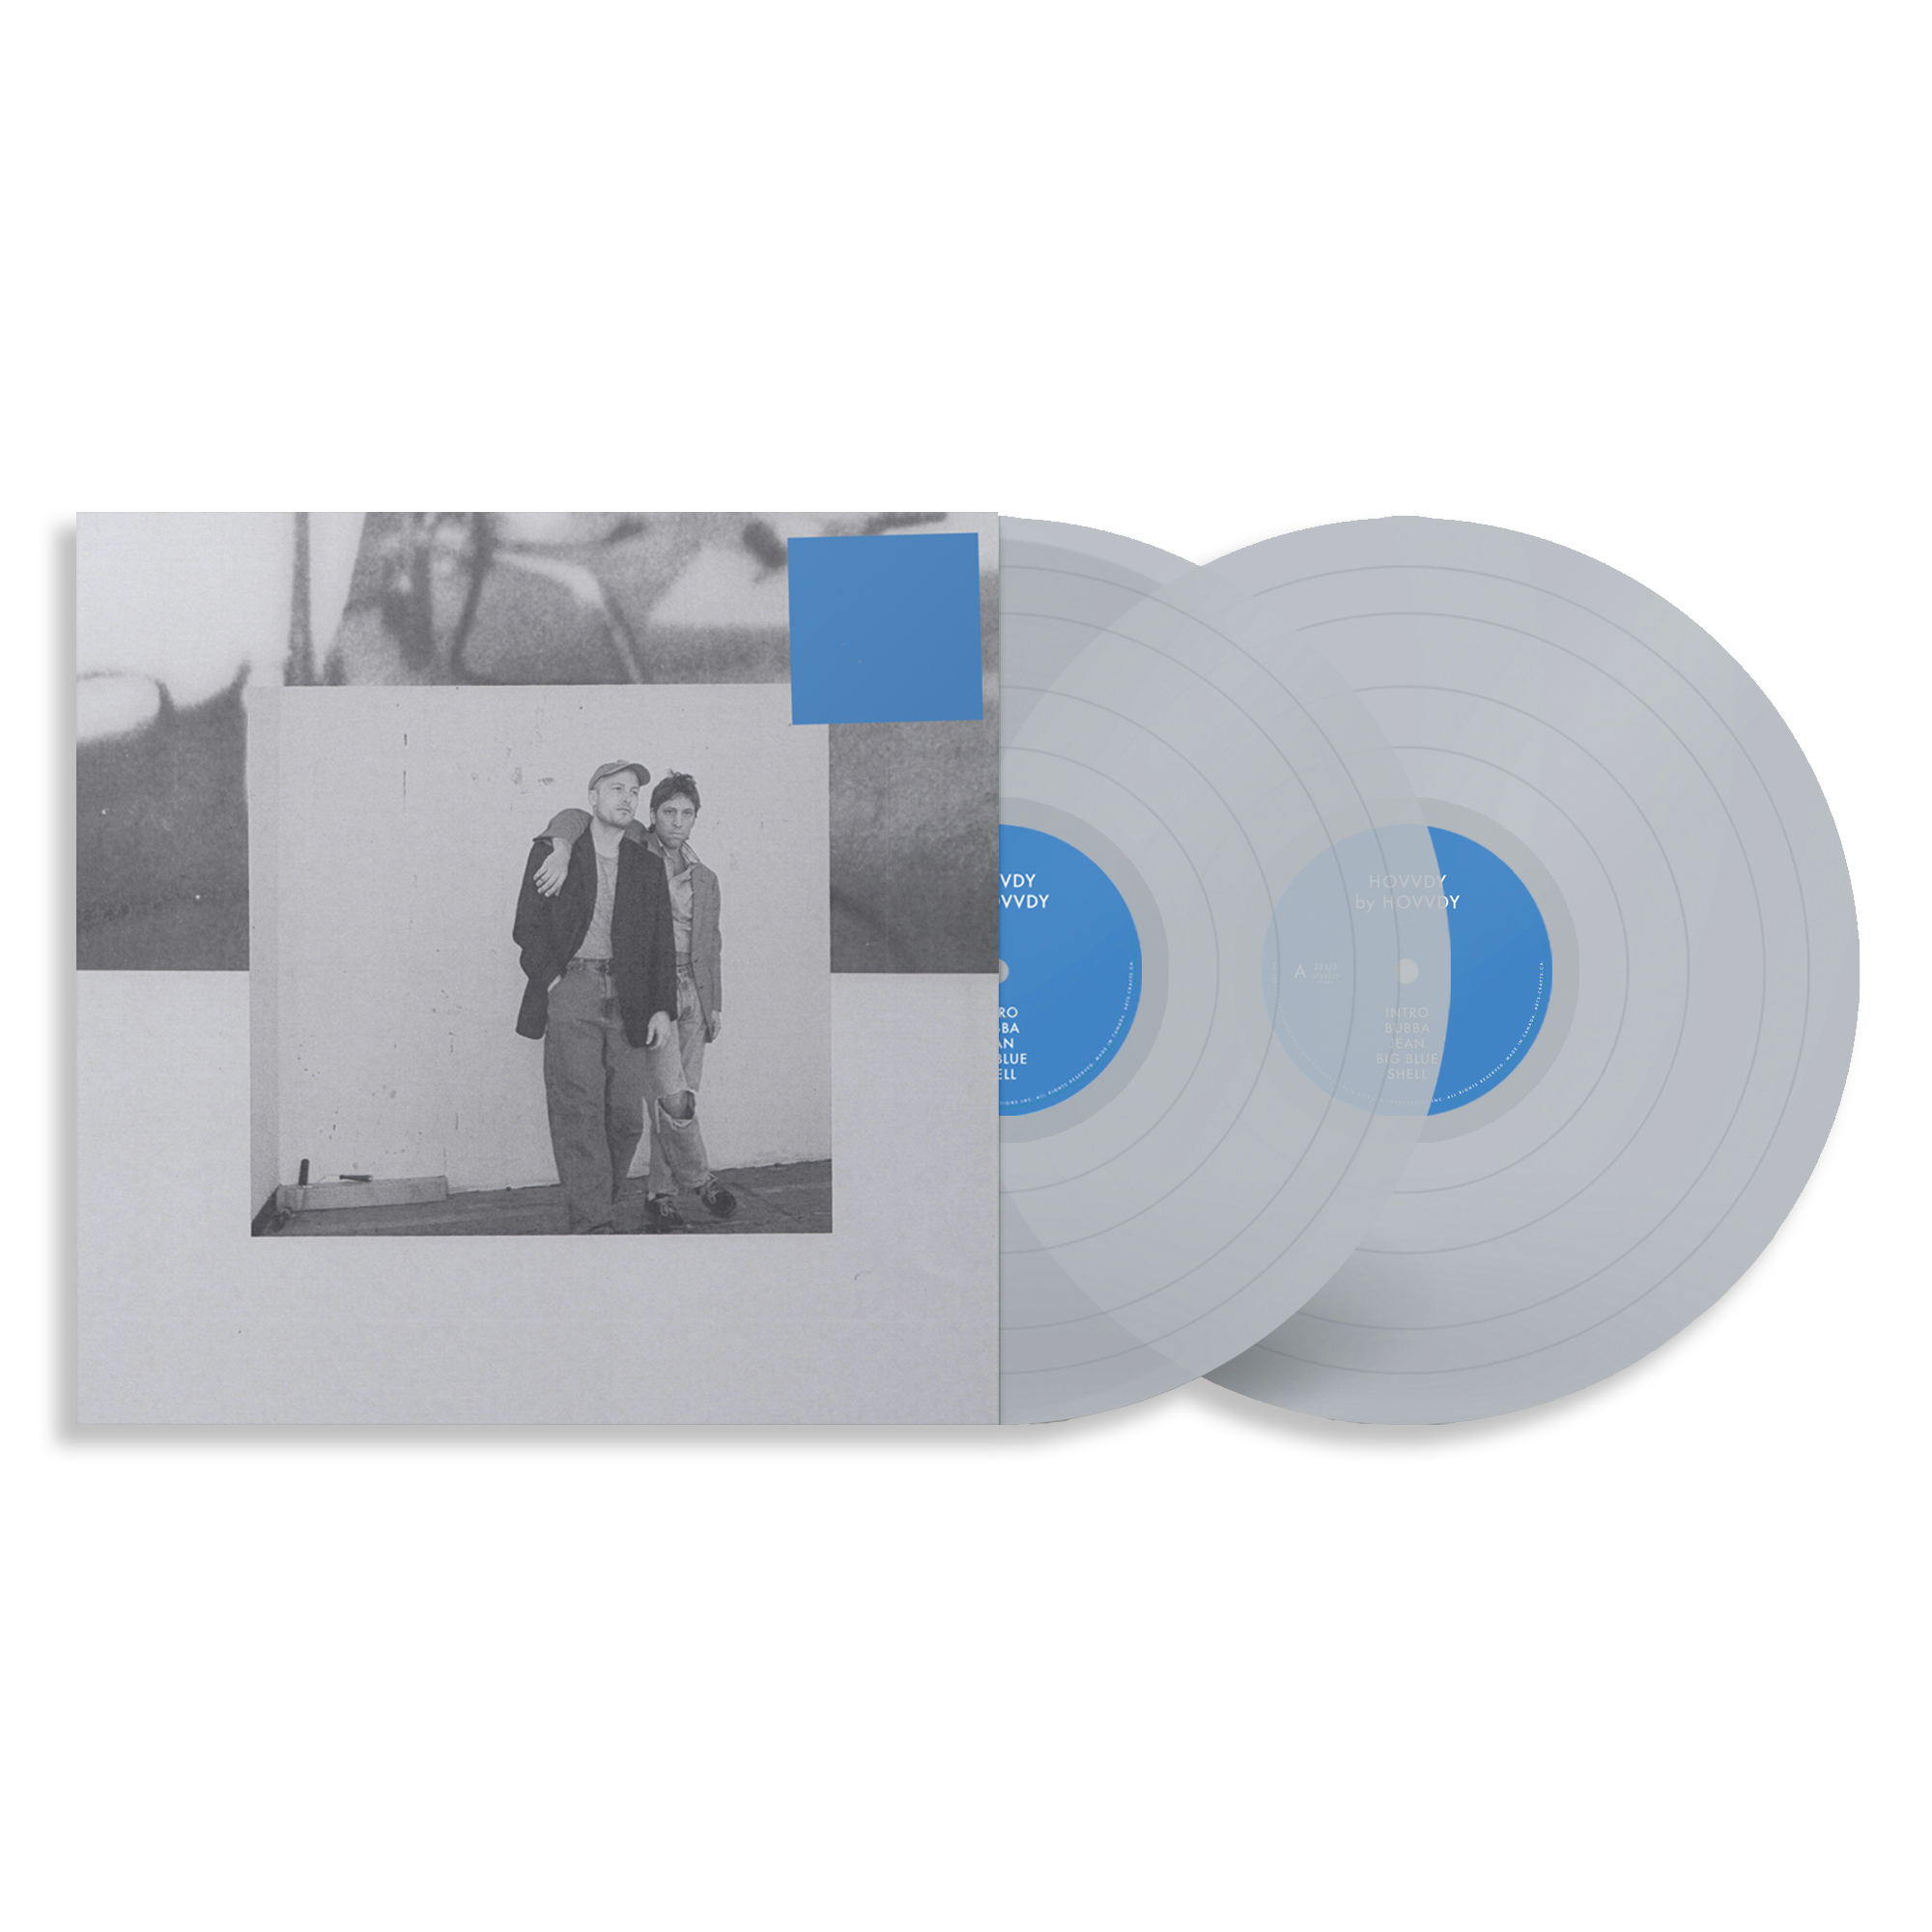 Hovvdy: Limited Clear Vinyl 2LP